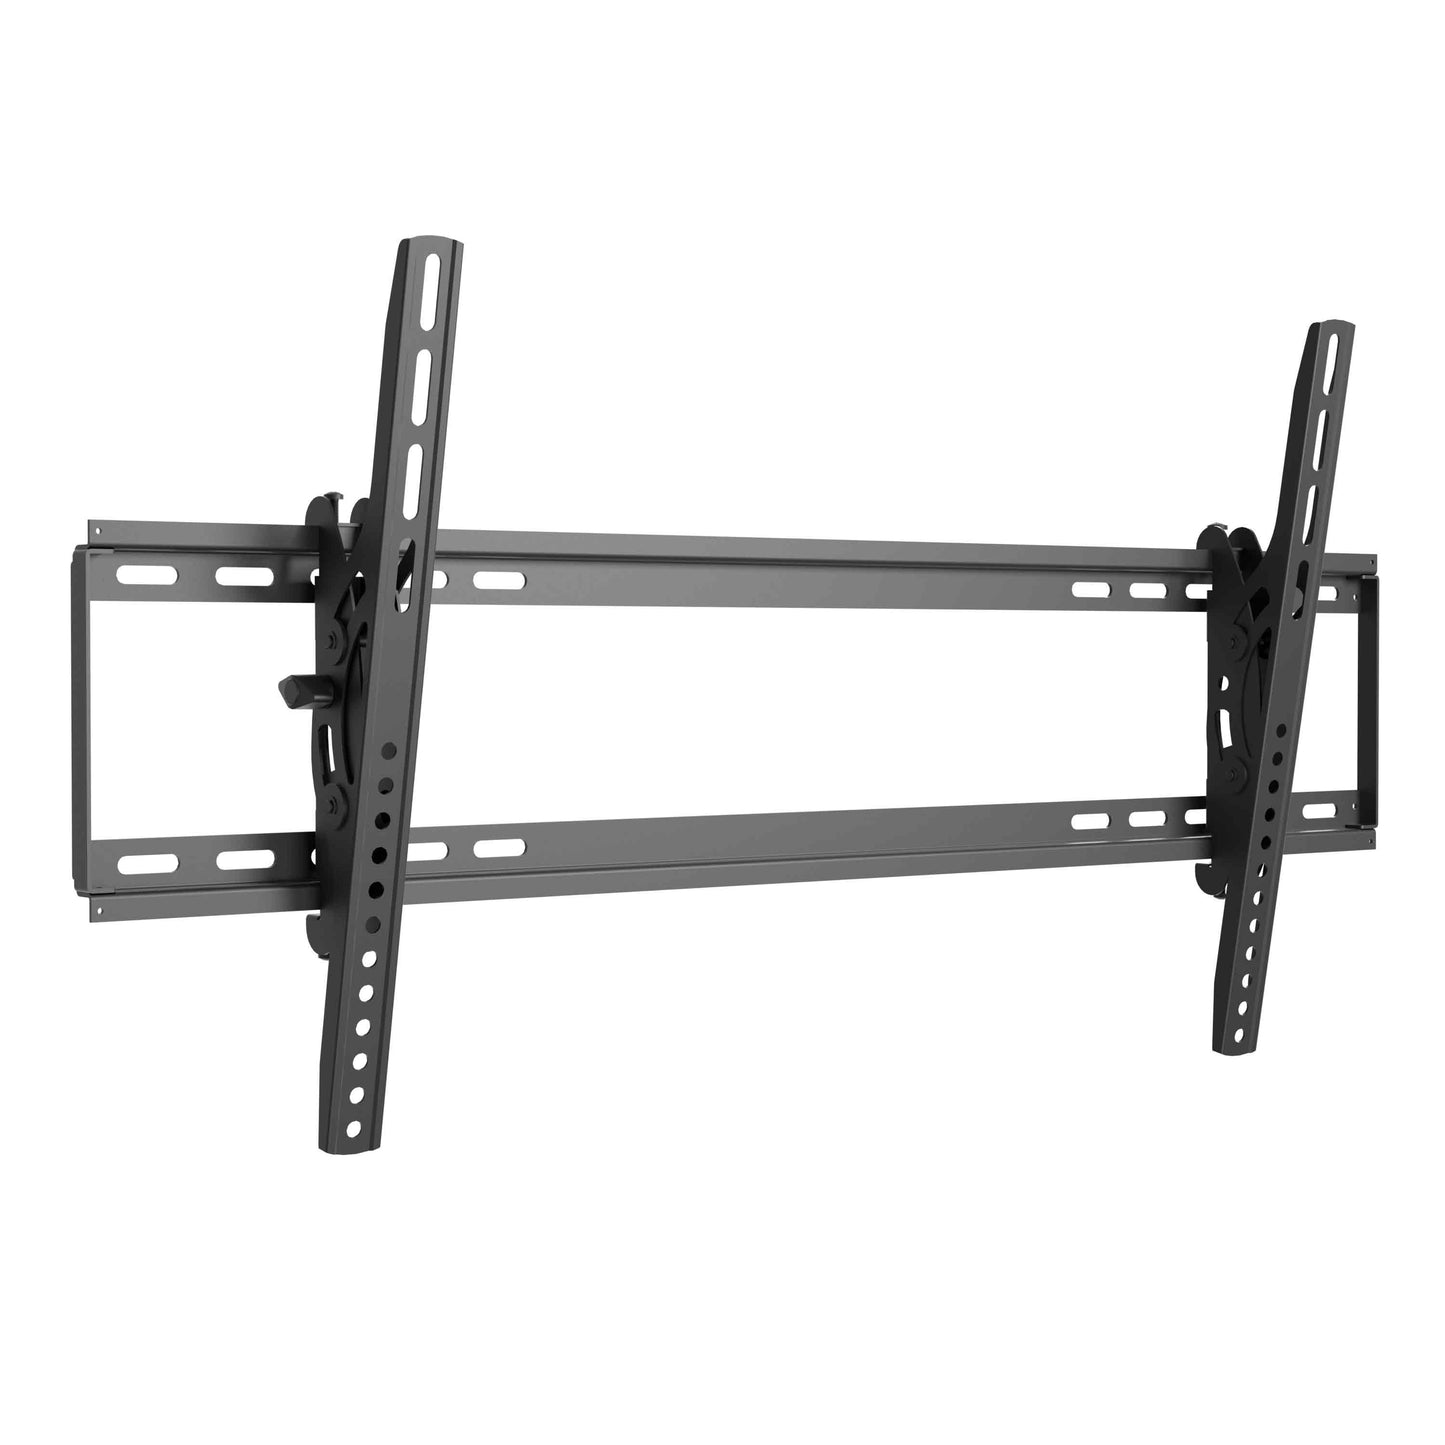 ProMounts Tilt Open Plate TV Wall Mount for 50”-90” TVs Holds up to 132lbs